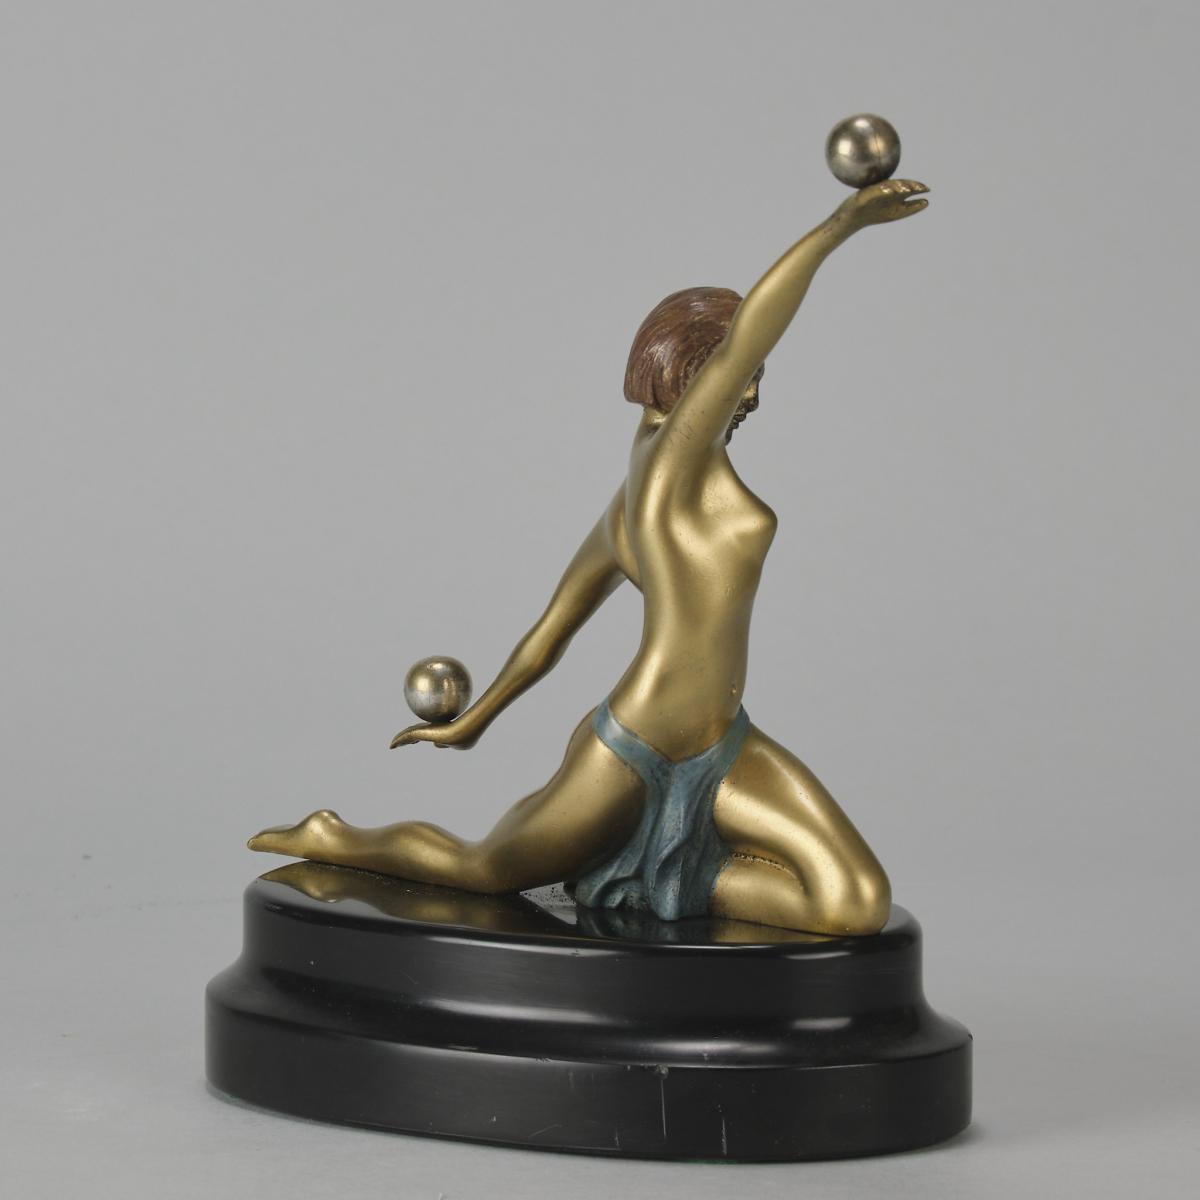 Early 20th Century Cold-Painted Art Deco Sculpture entitled "Deco Dancer"